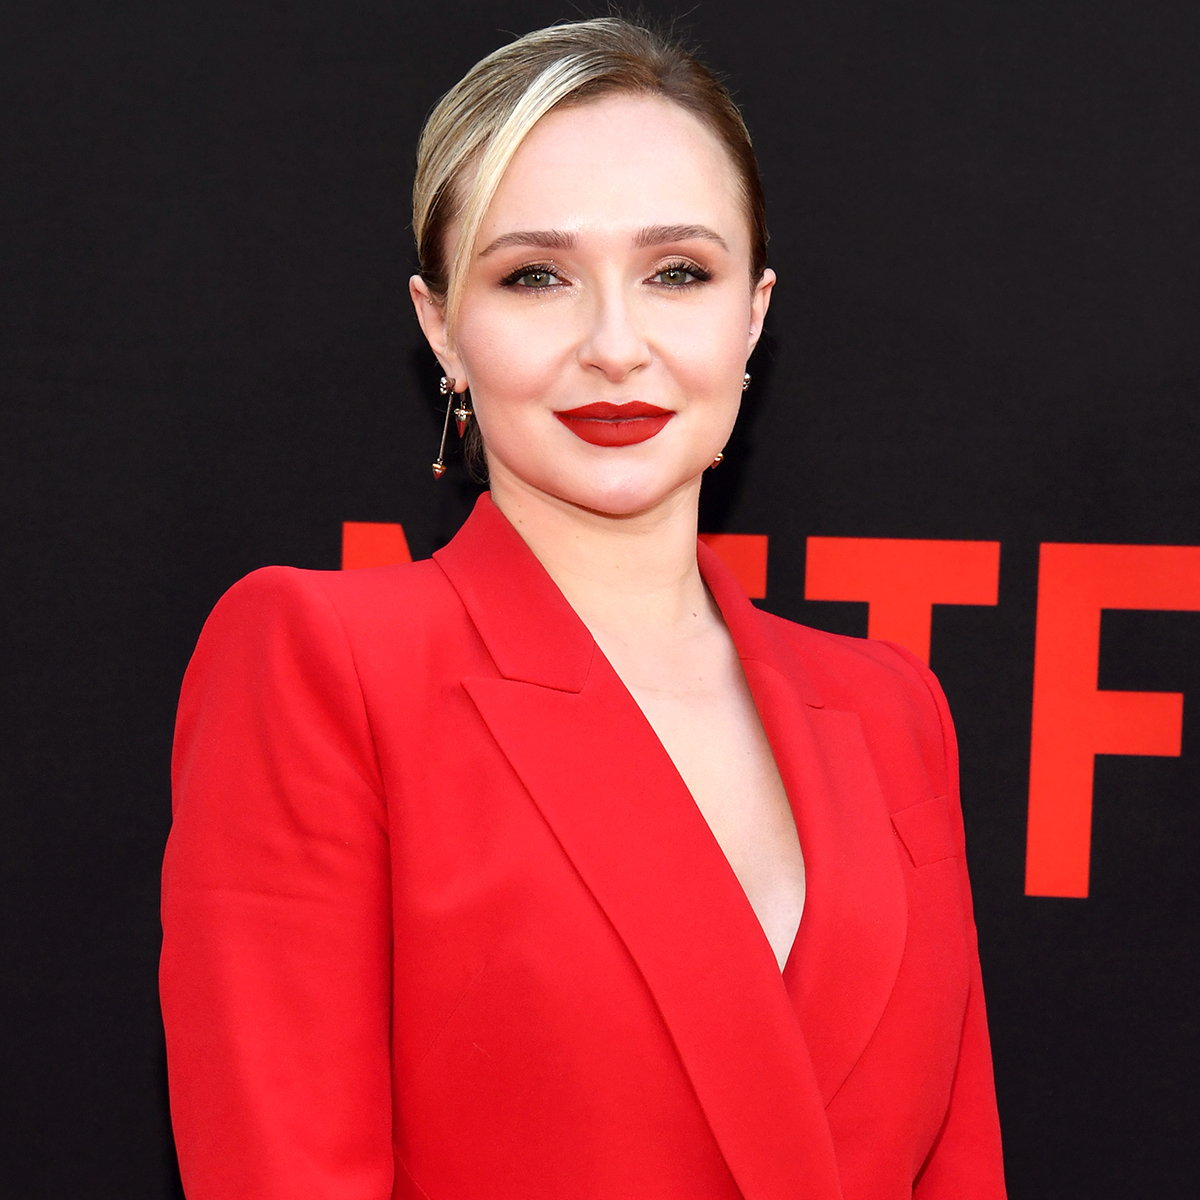 Hayden Panettiere Reflects on “Heartbreaking” Decision to Relinquish Custody of